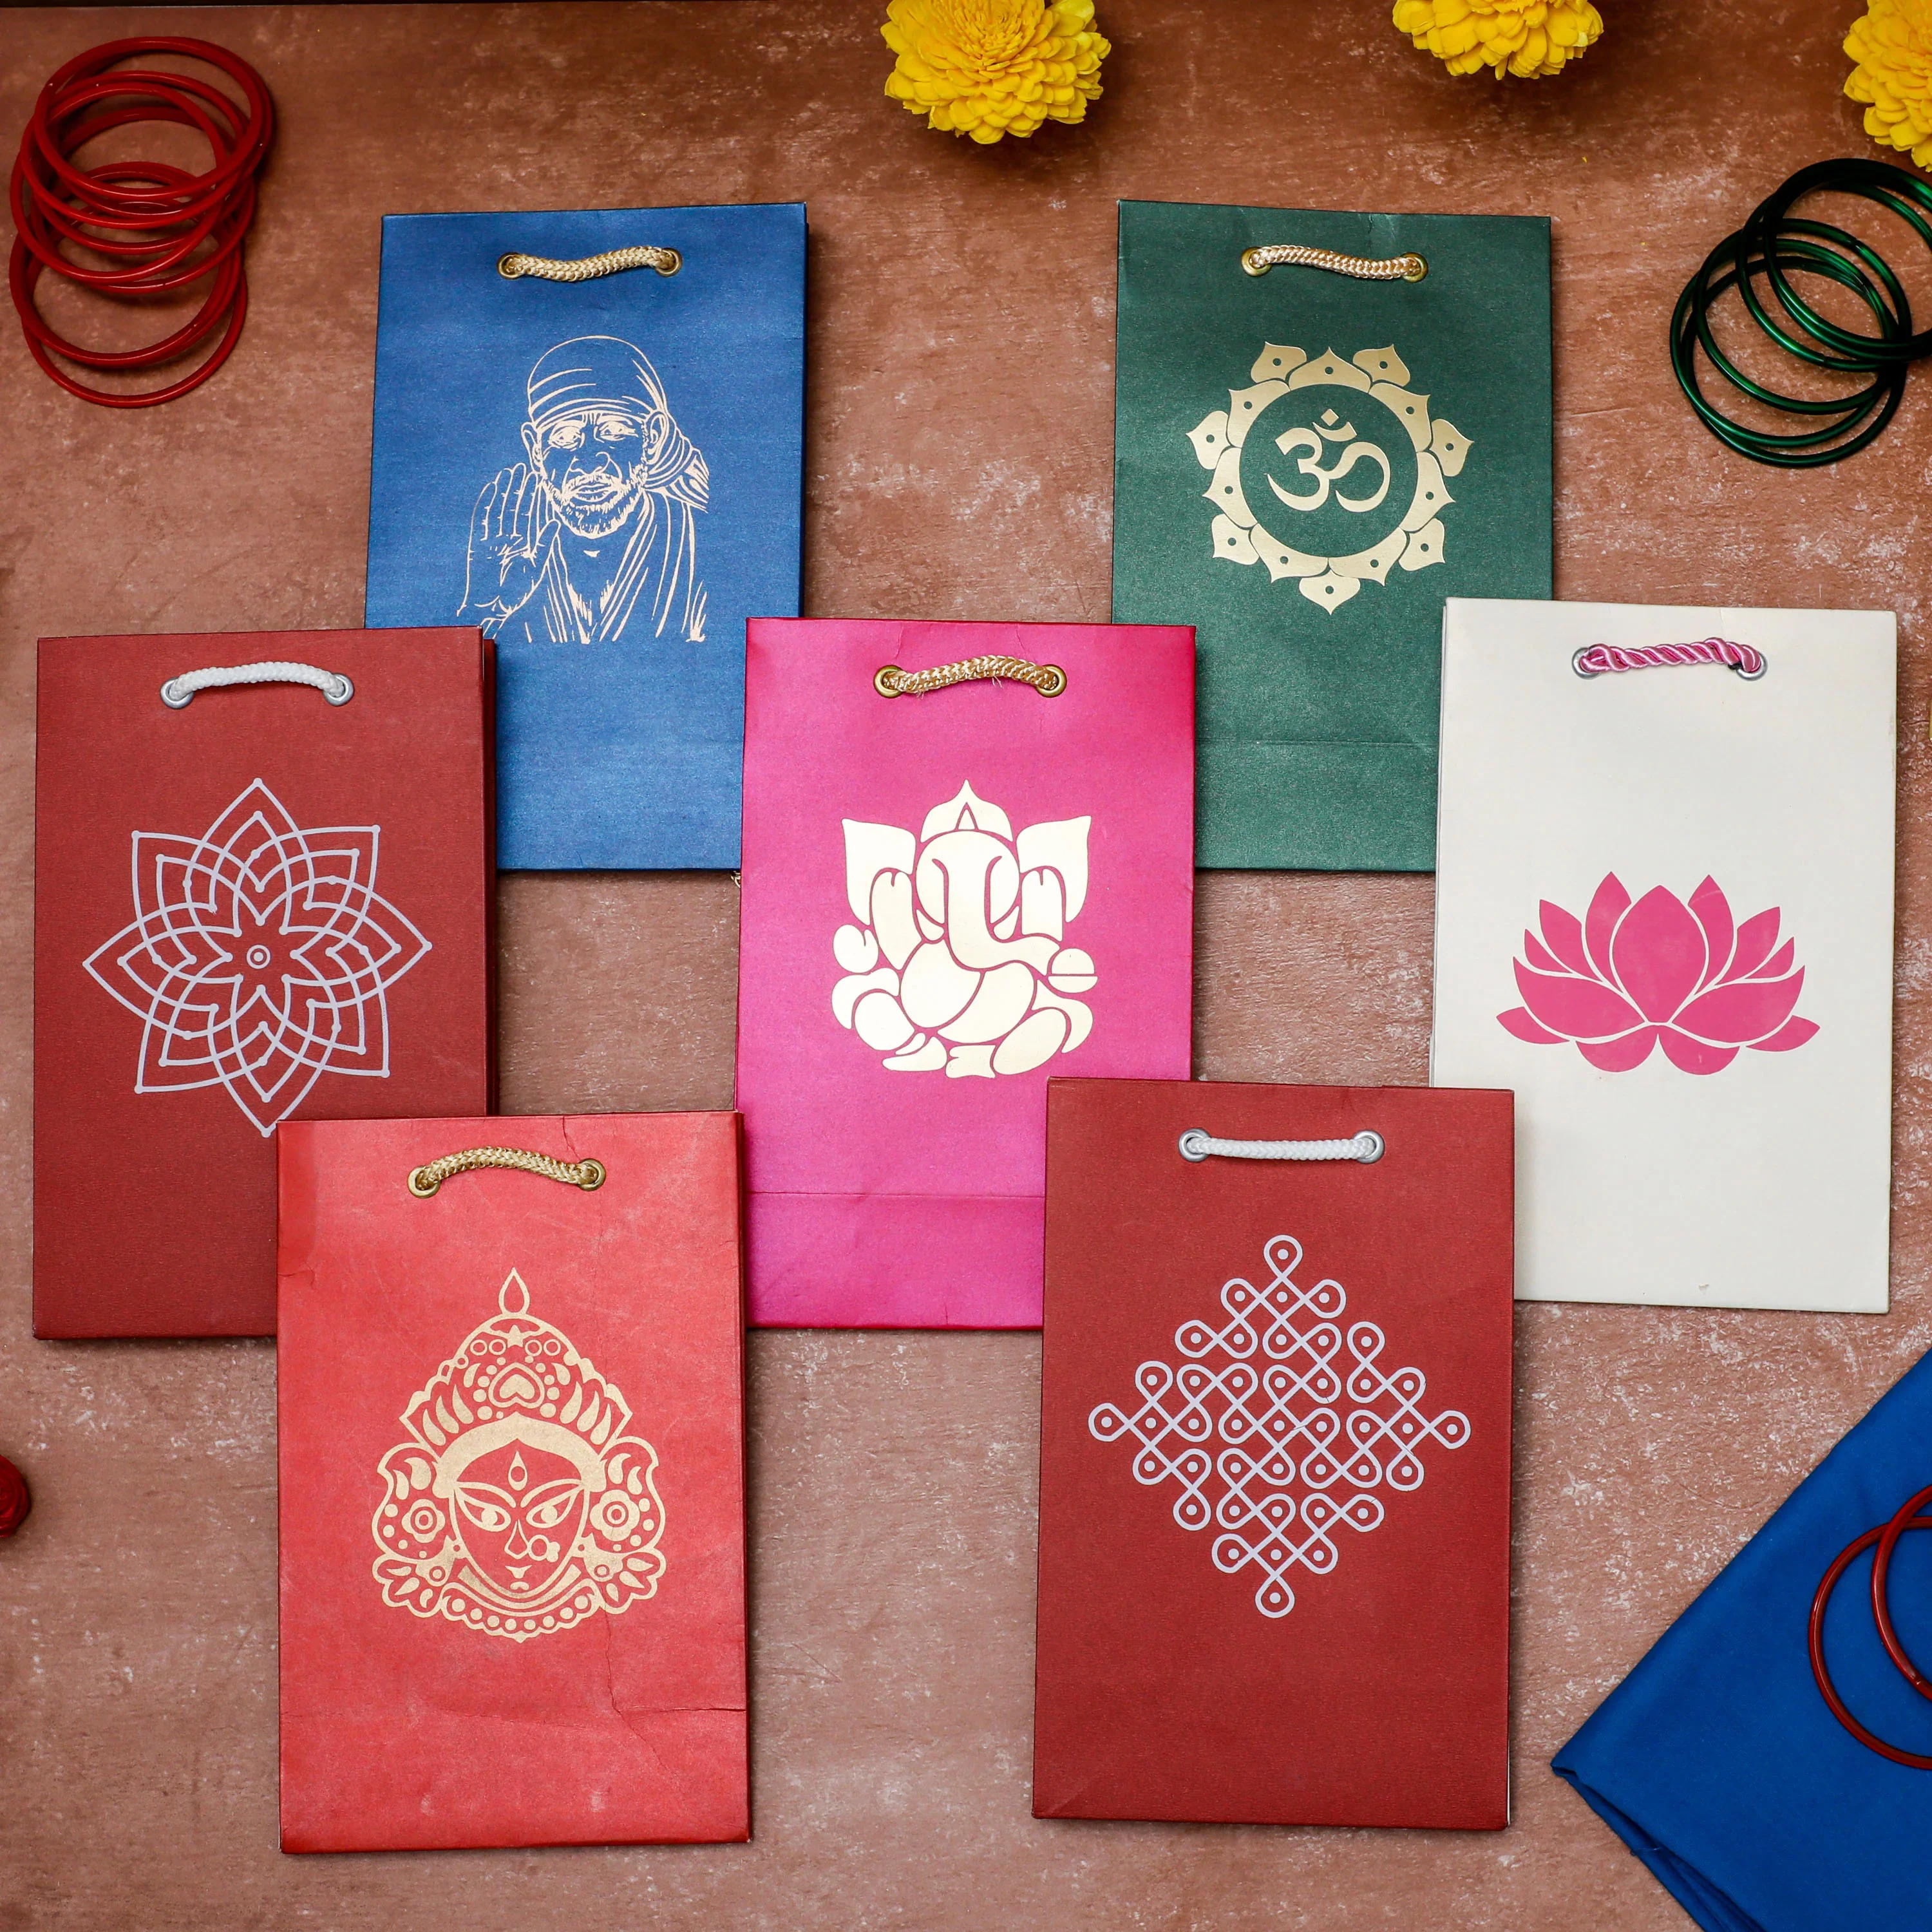 300 GSM made paper Bags in multicolor